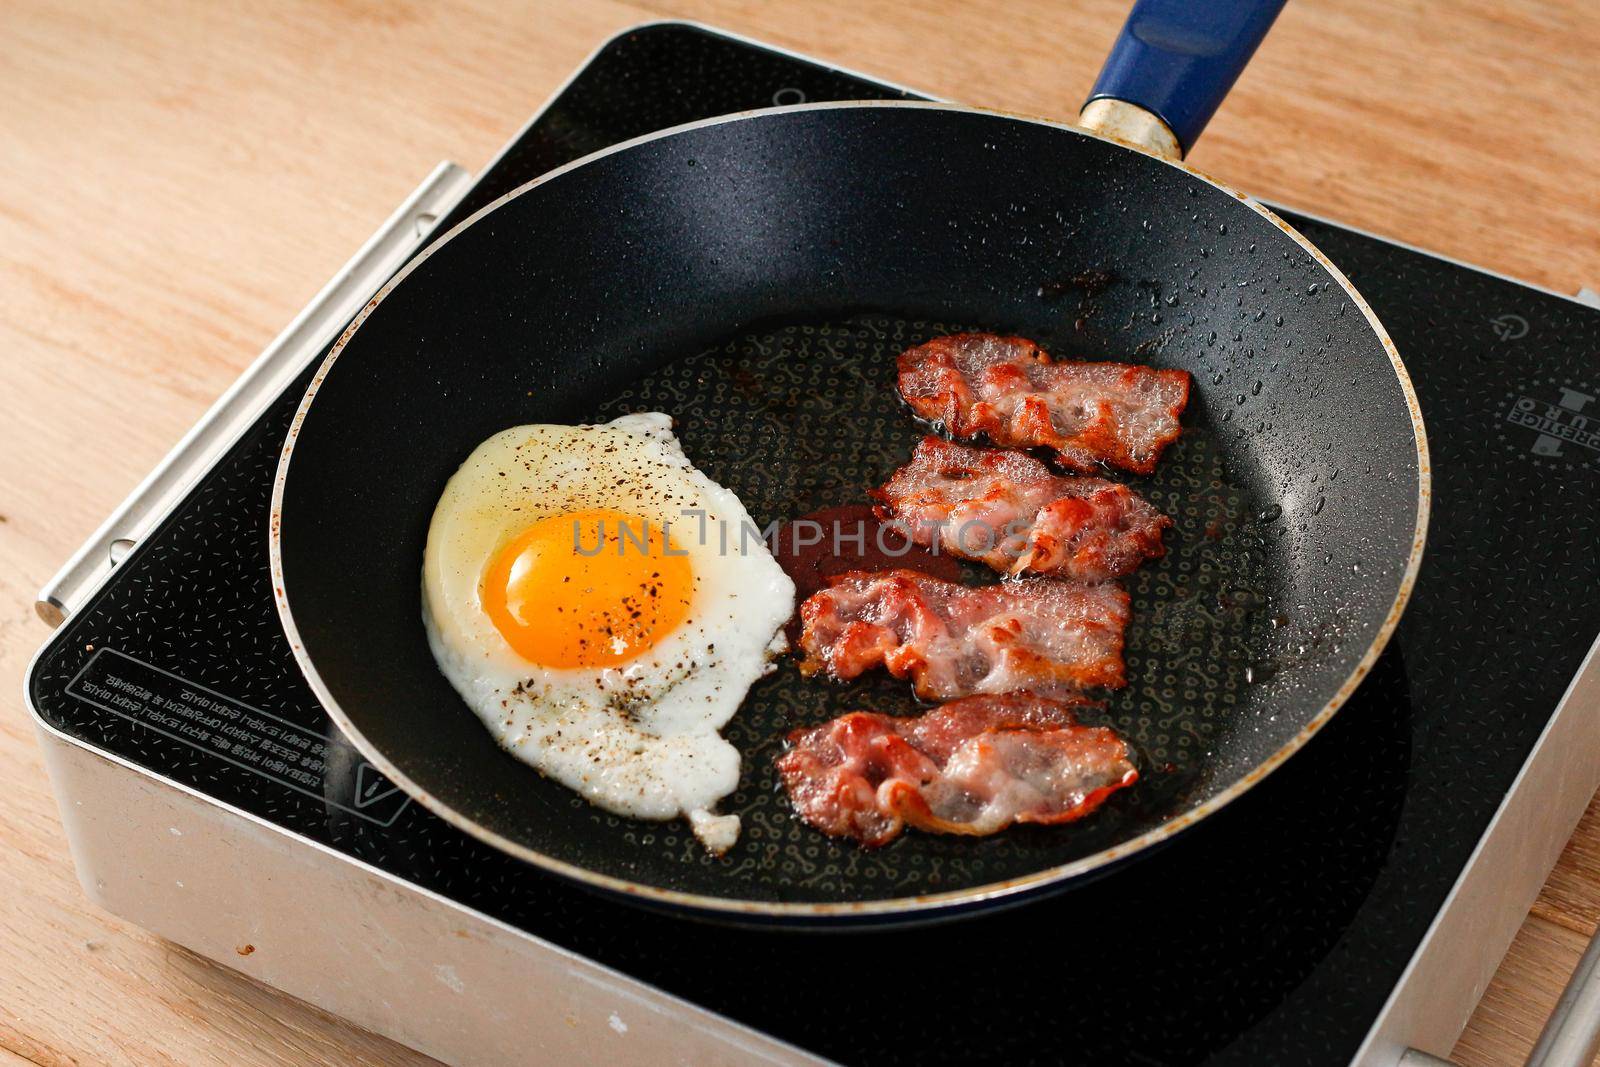 Tasty breakfast with fried eggs and bacon in a pan by uphotopia